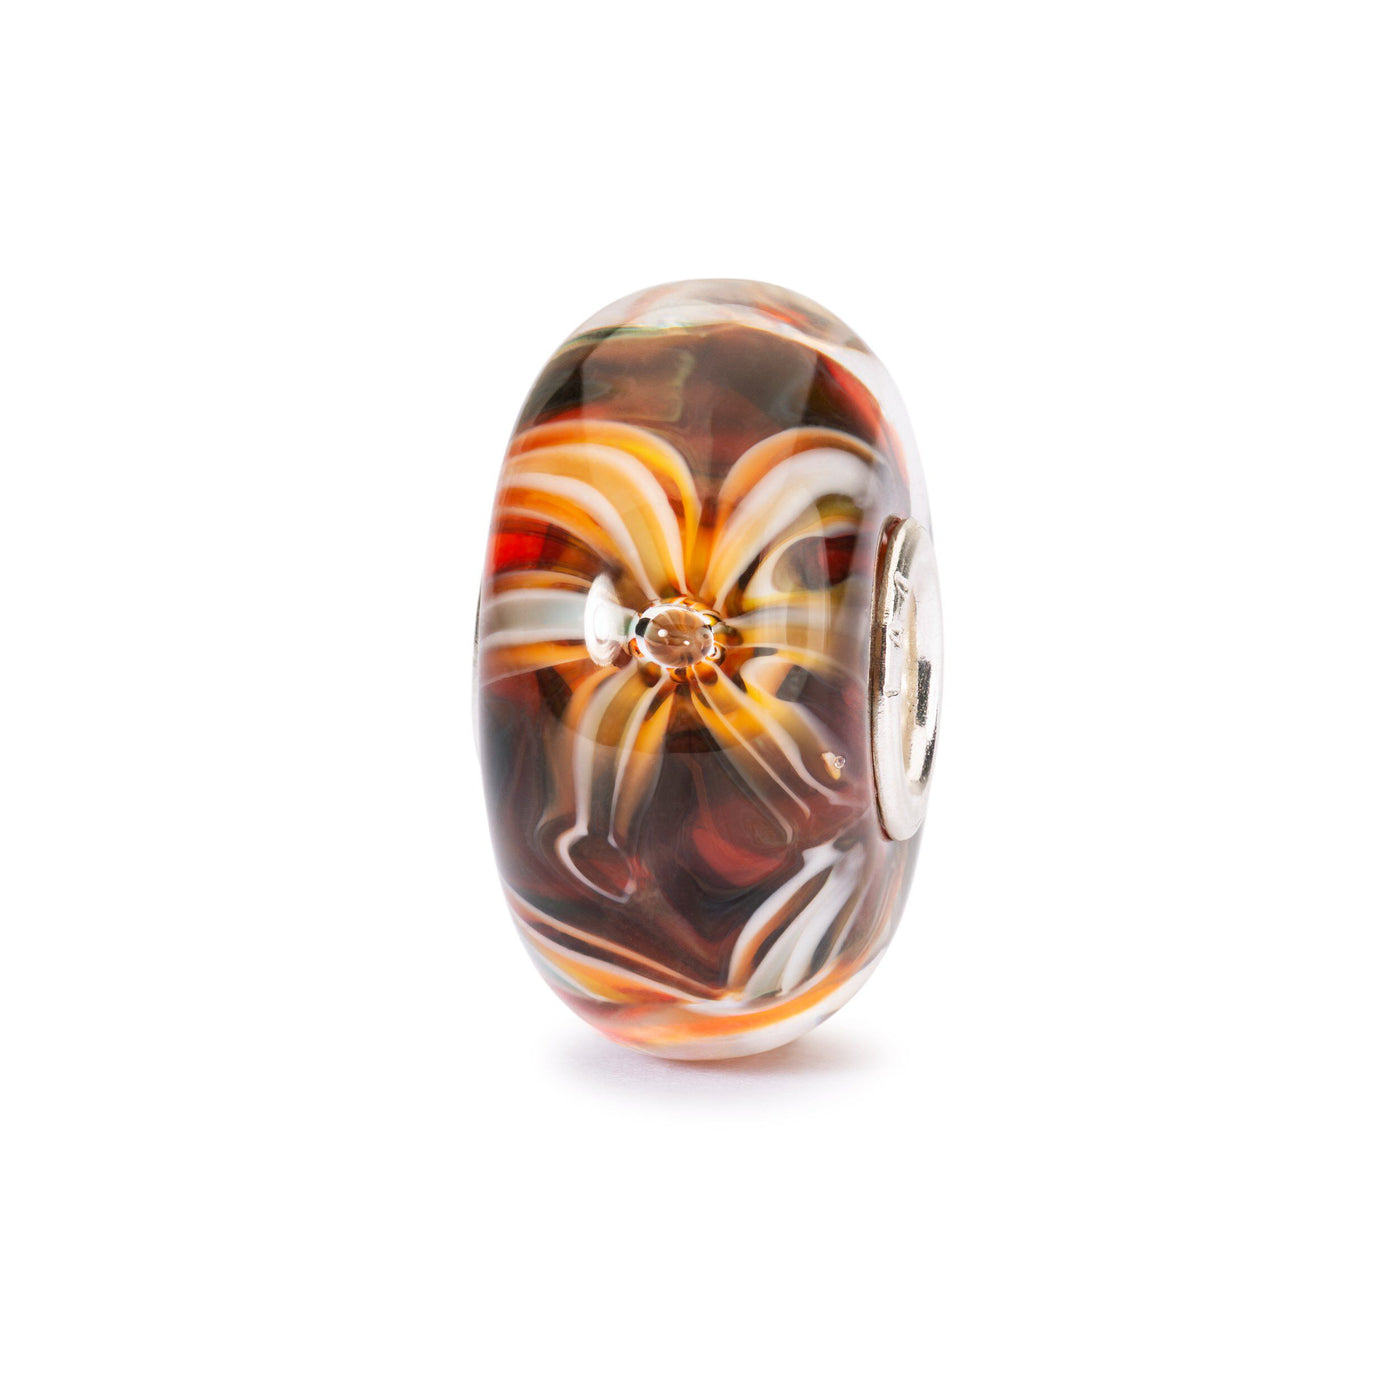 Flowers of Passion - Trollbeads Canada